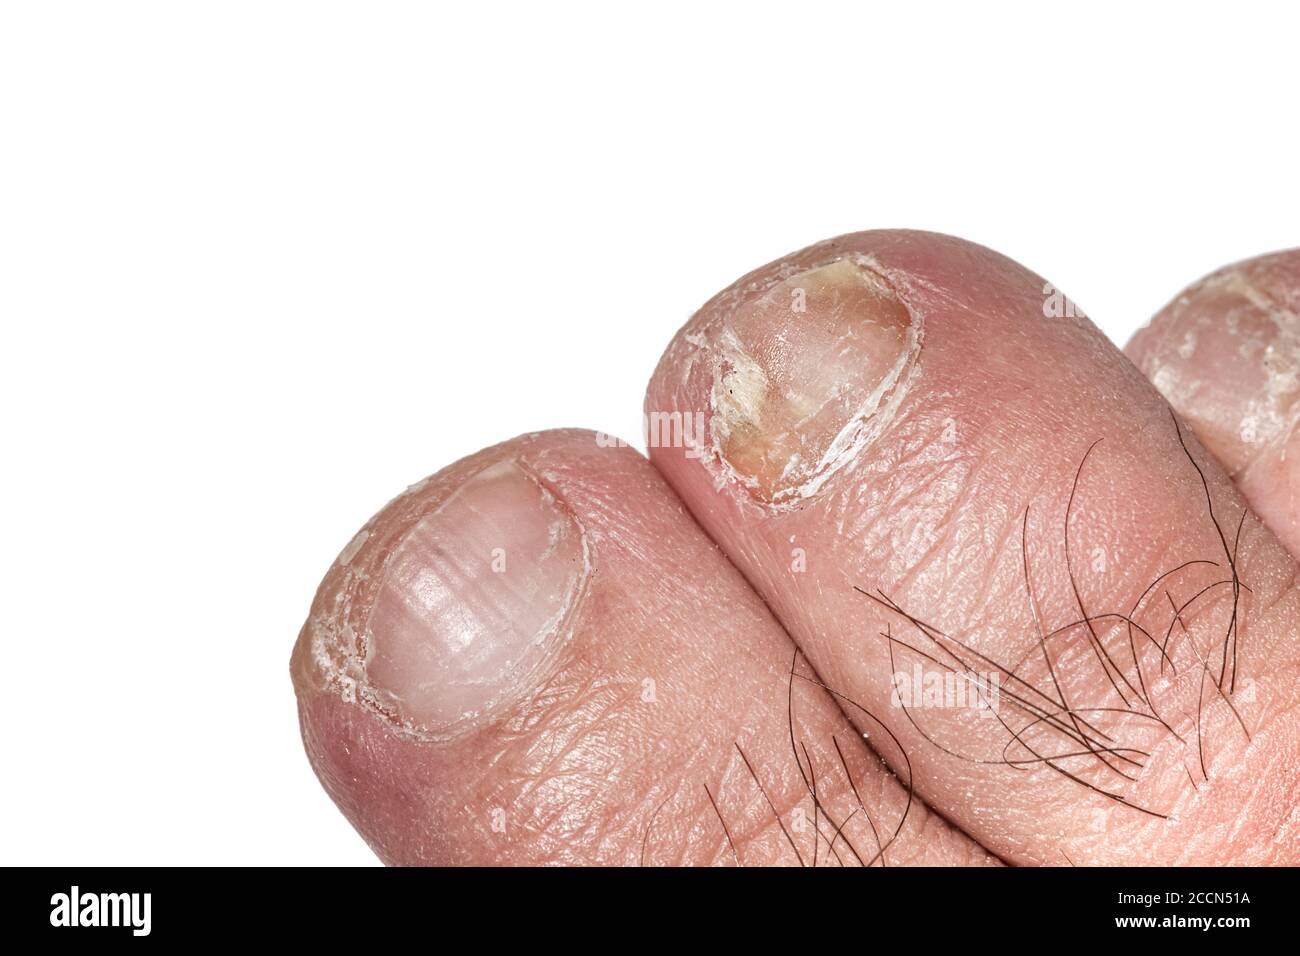 Macro photography of toe nails infected with Onychomycosis. Stock Photo